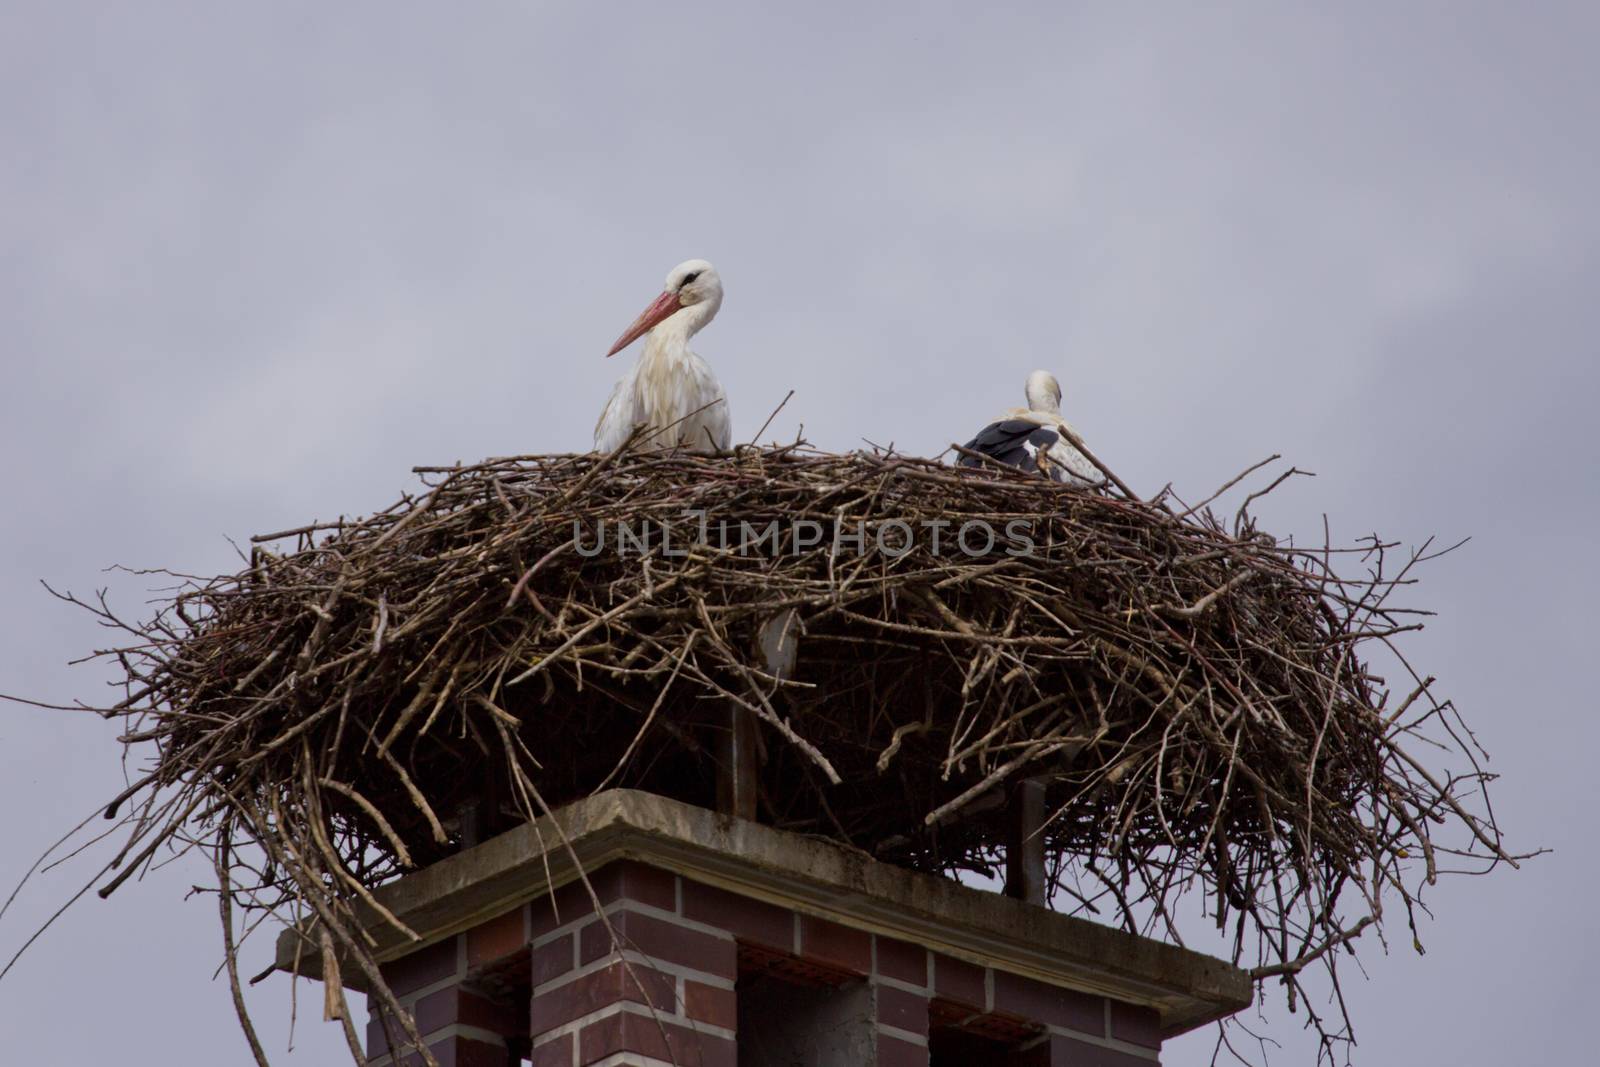 Stork family in storks nest by gwolters